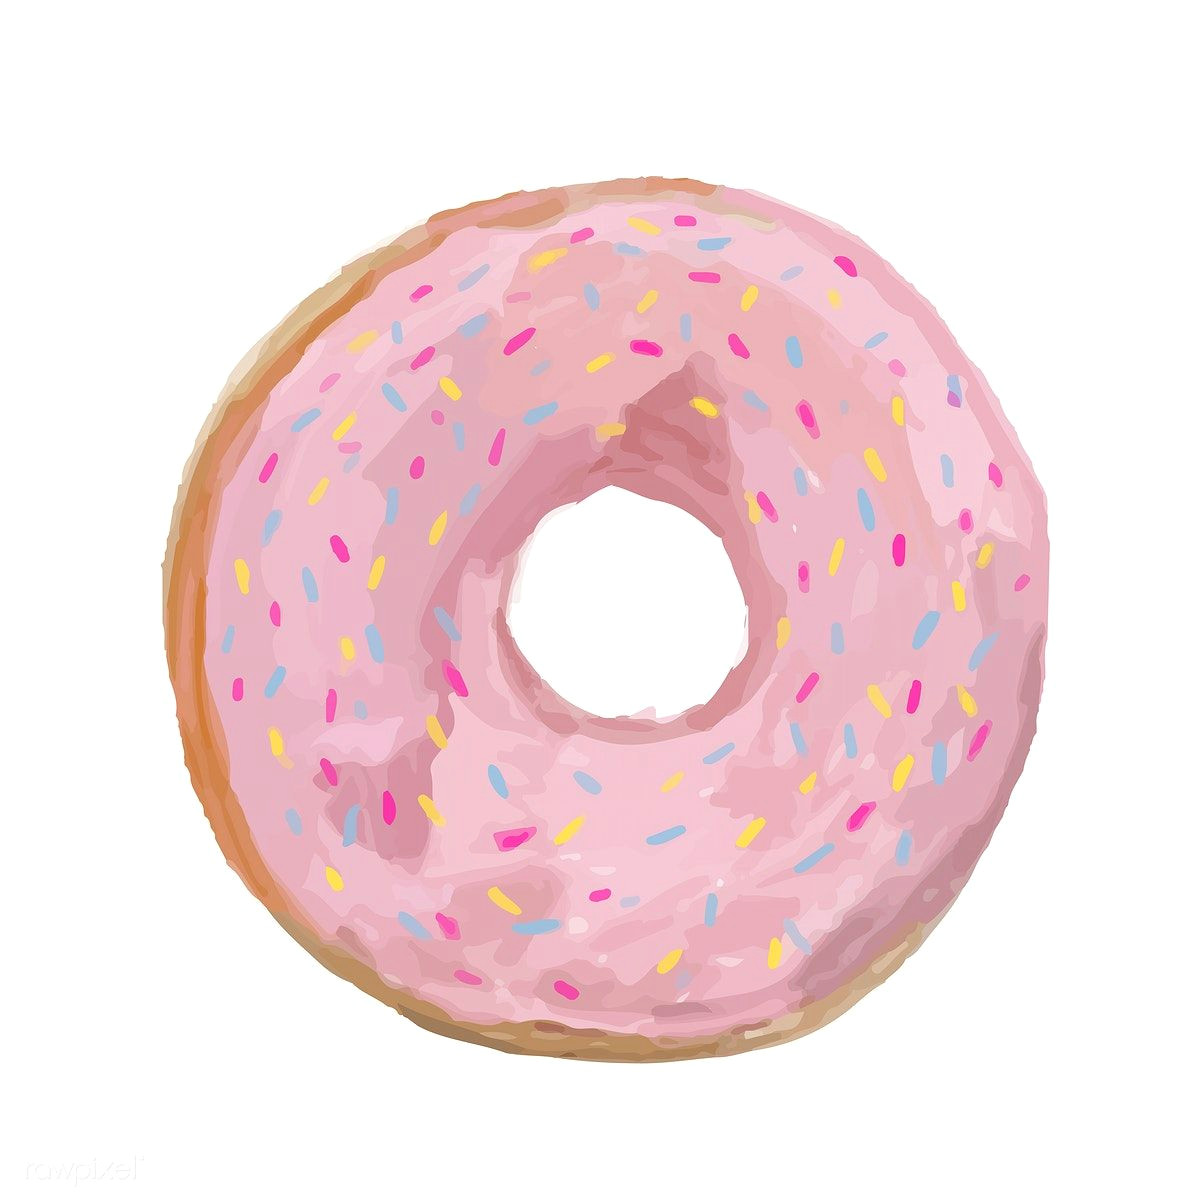 Donut Drawing Easy Hand Drawn Donut Watercolor Style Free Image by Rawpixel